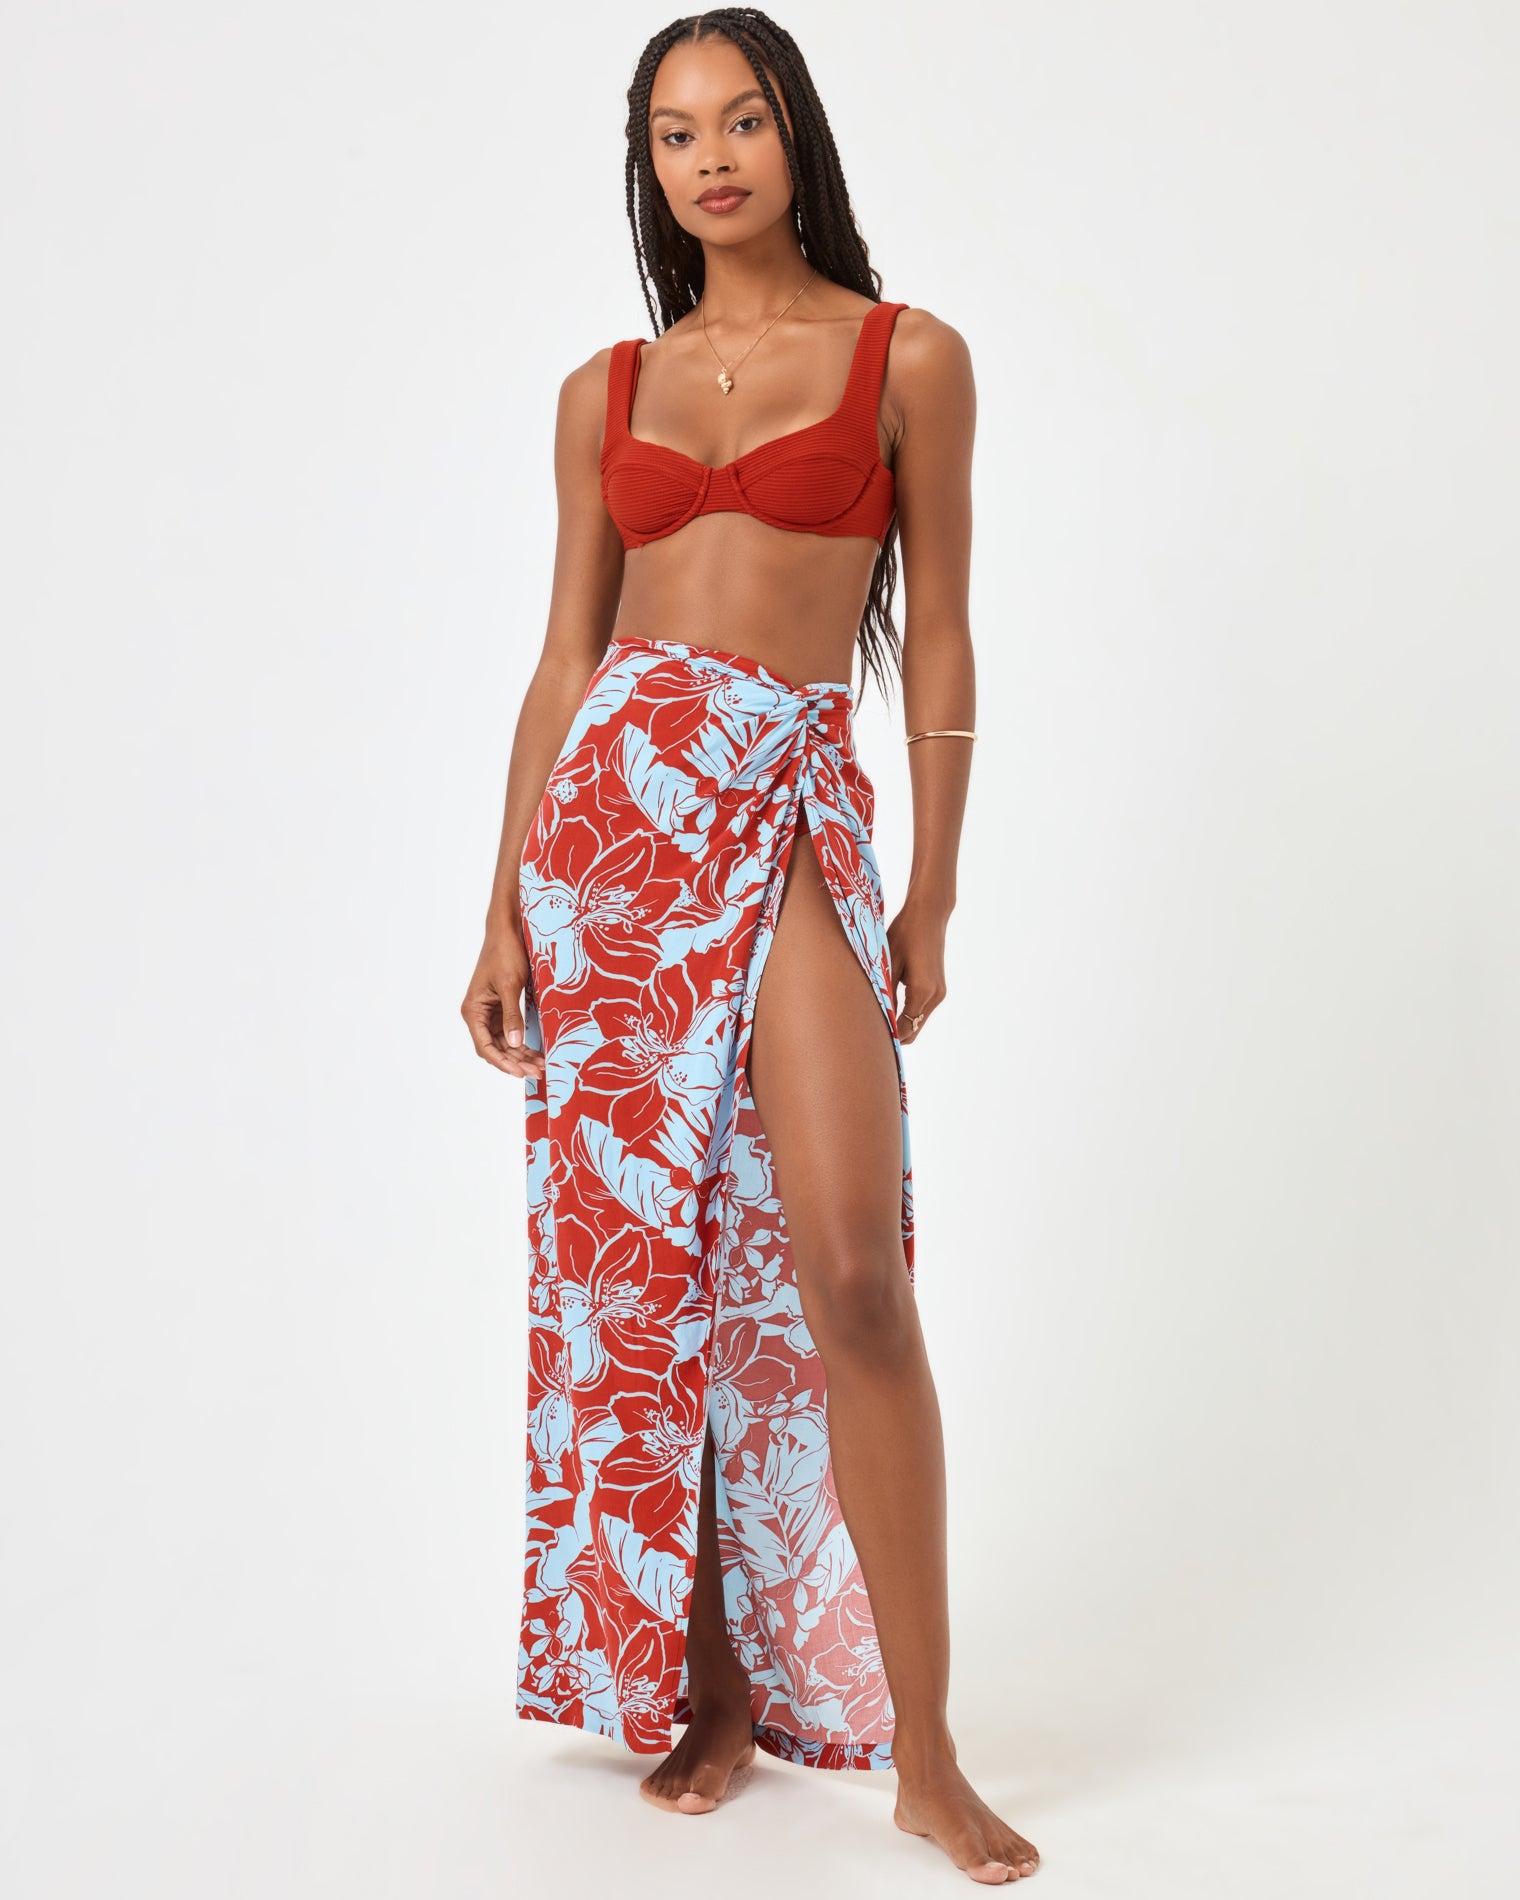 Red Sarong Cover-Up - Sparkly Swim Cover-Up - Sparkly Sarong - Lulus